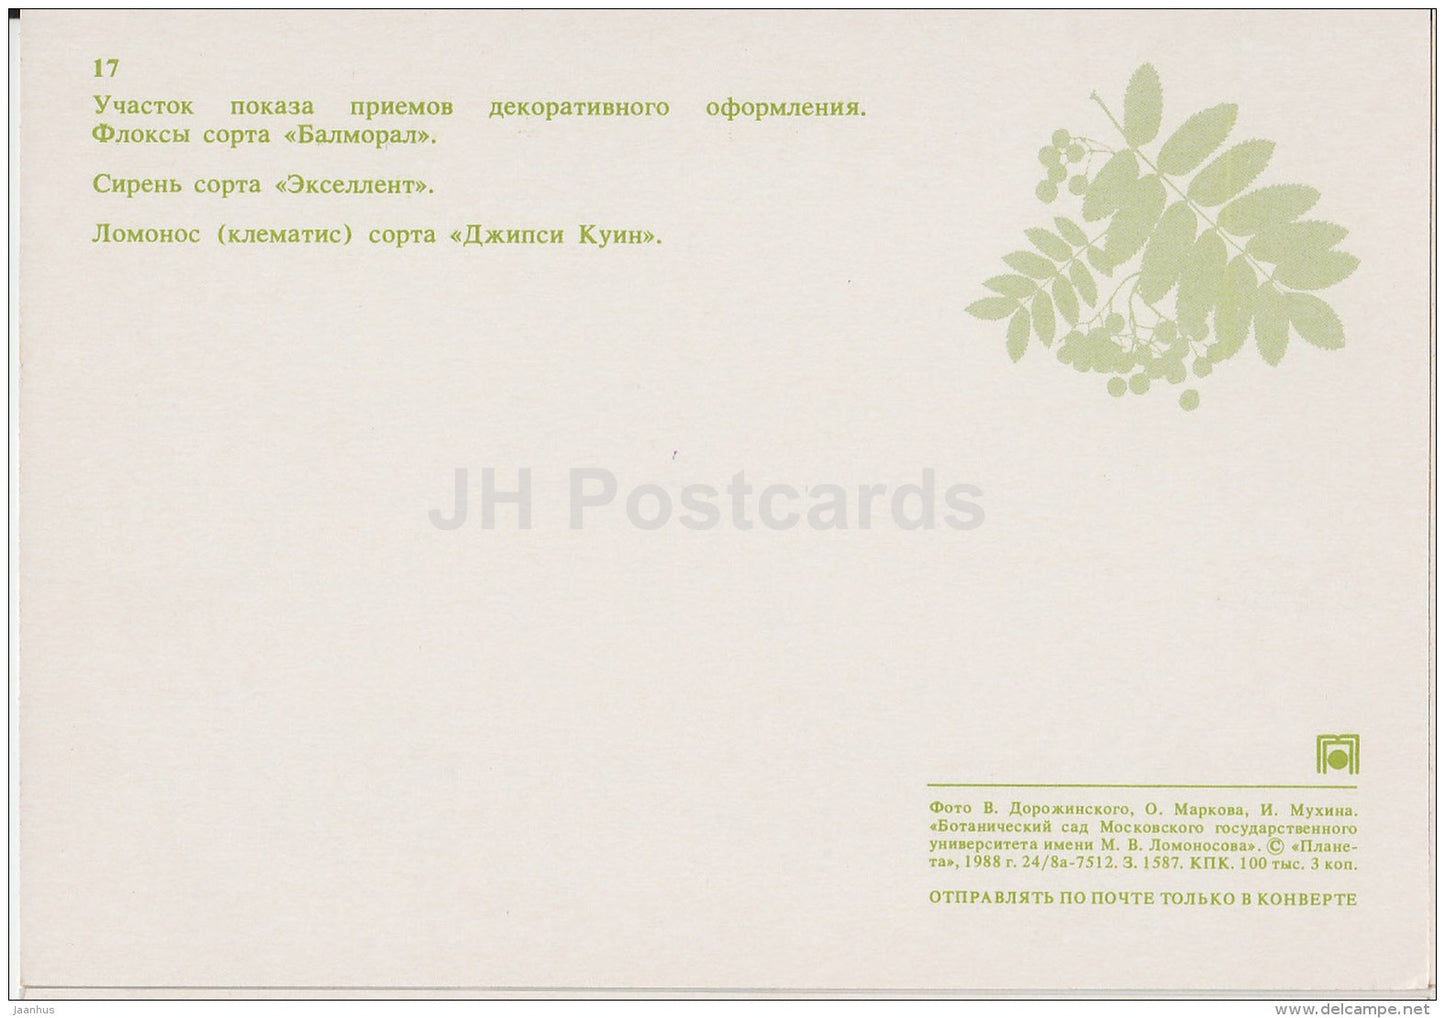 phlox Balmoral - lilac Excellent - clematis Gypsy Queen - Moscow Botanical Garden - 1988 - Russia USSR - unused - JH Postcards